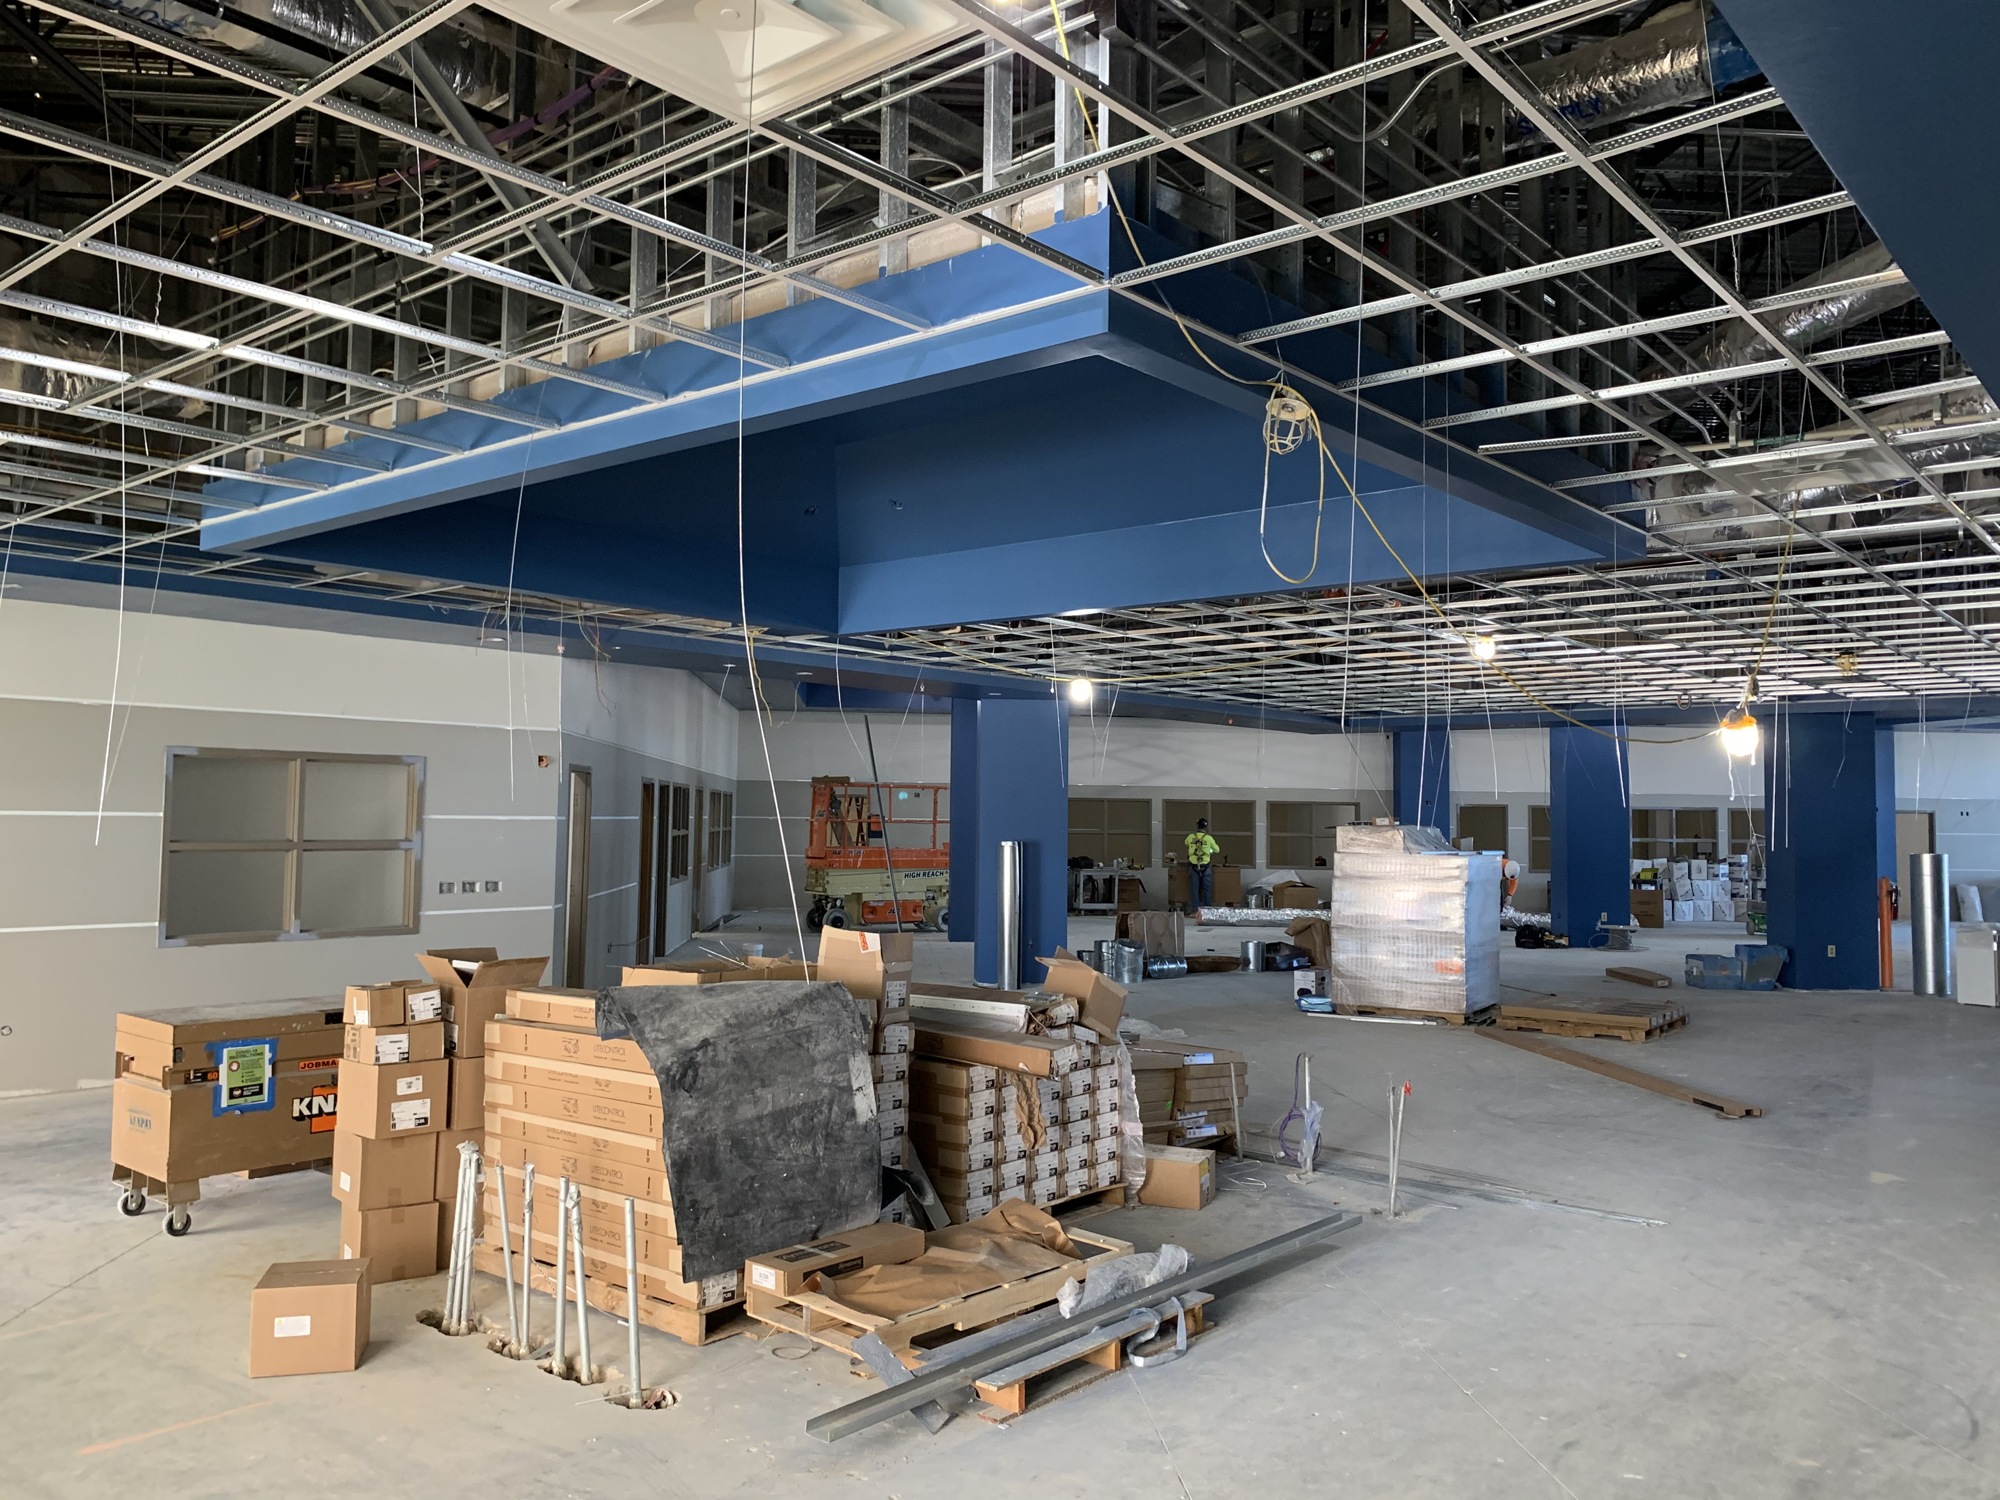 As of December 2020, Horizon High School has all of its roofing on, and interior work has begun. (Courtesy OCPS)